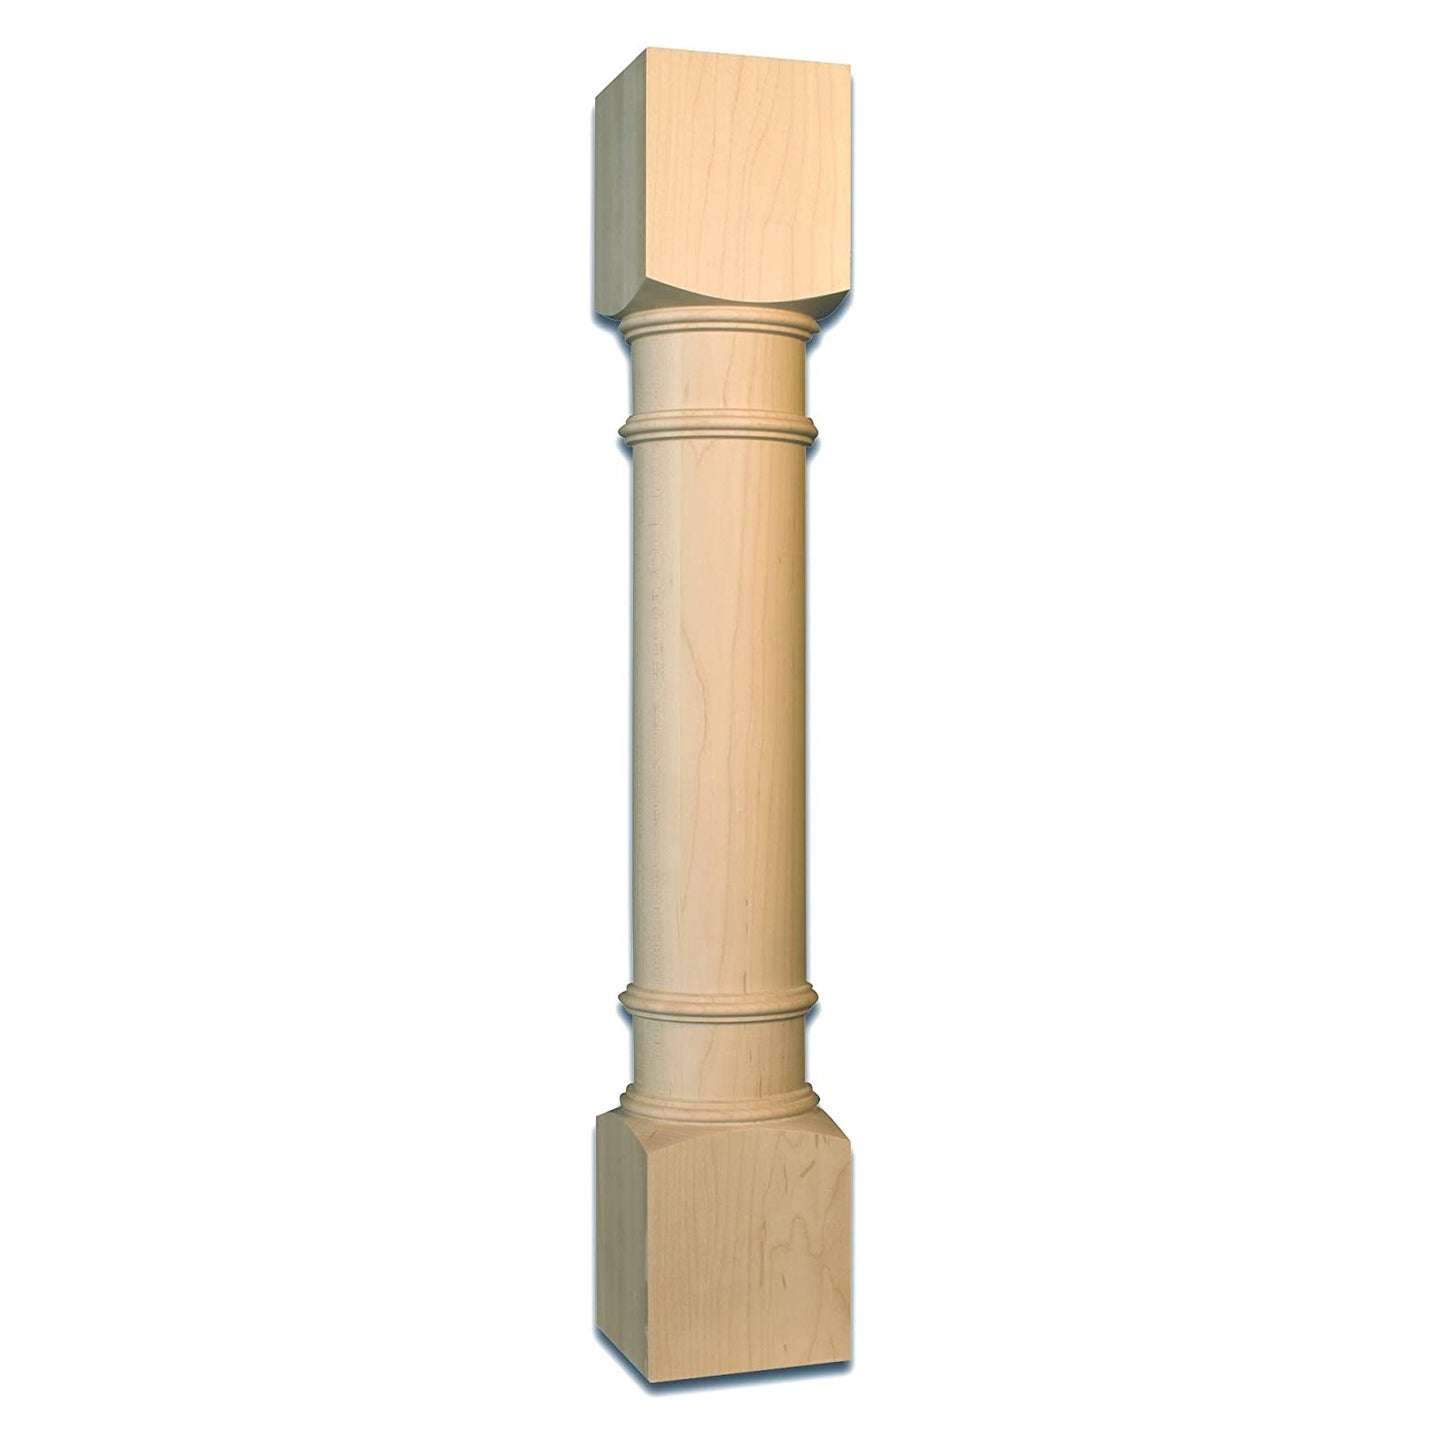 Colonial Post 35-1/4" Tall x 5" Square